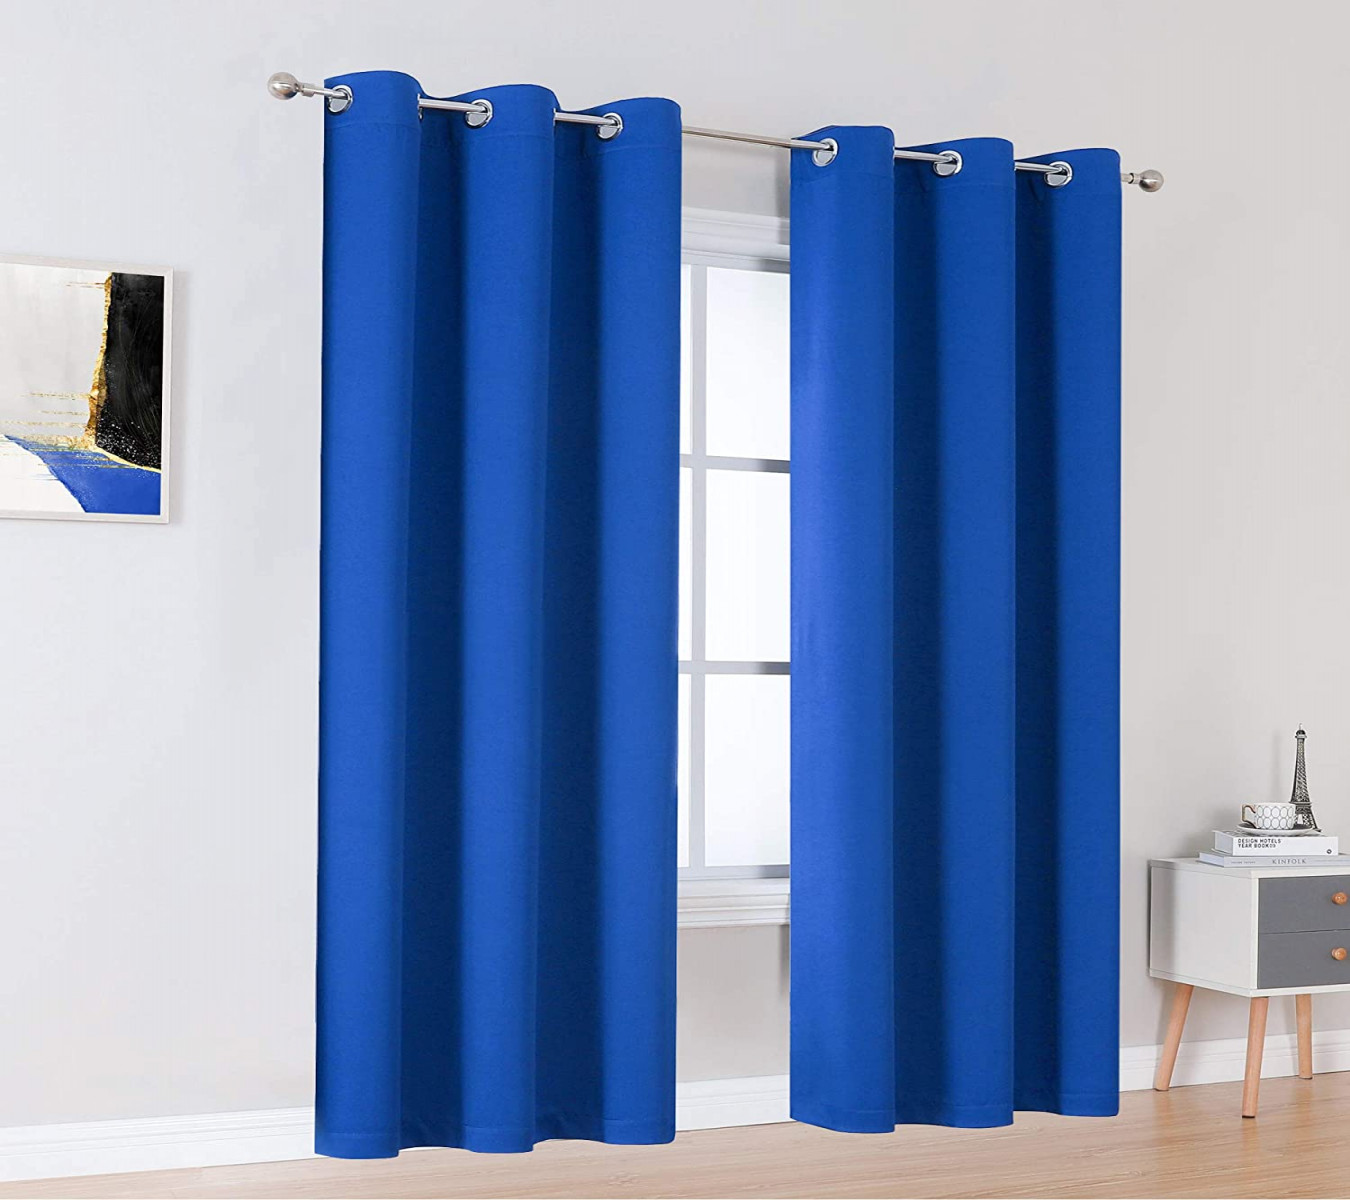 Inch Royal Blue Curtains for Living Room Solid Energy Efficient Room  Darkening Bedroom Curtains Thermal Insulated Grommet  x  Inch,  Panels